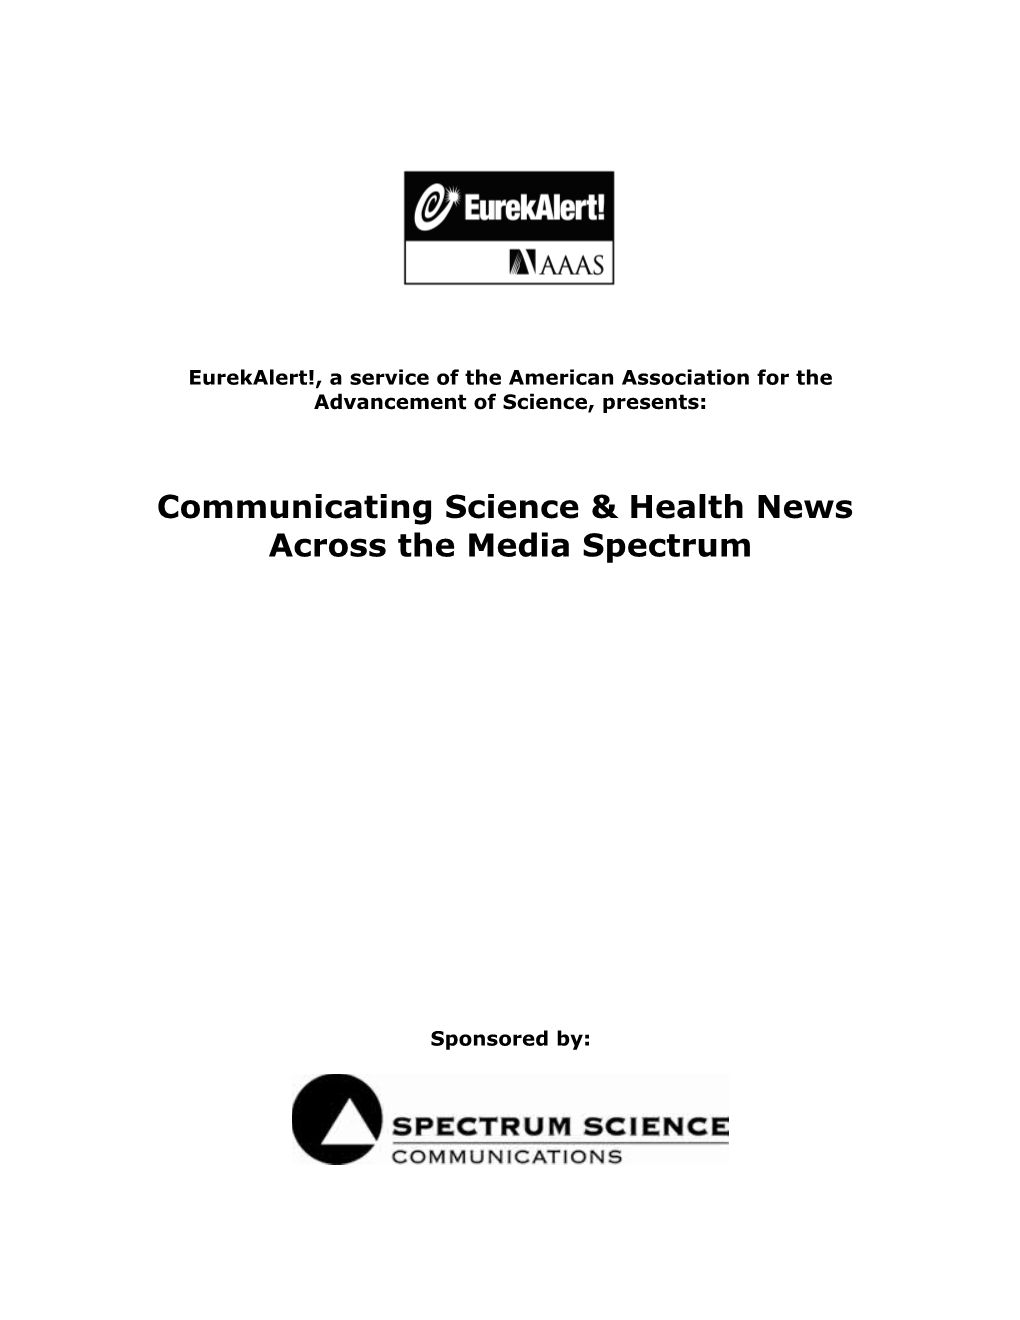 Eurekalert!, a Service of the American Association for the Advancement of Science, Presents